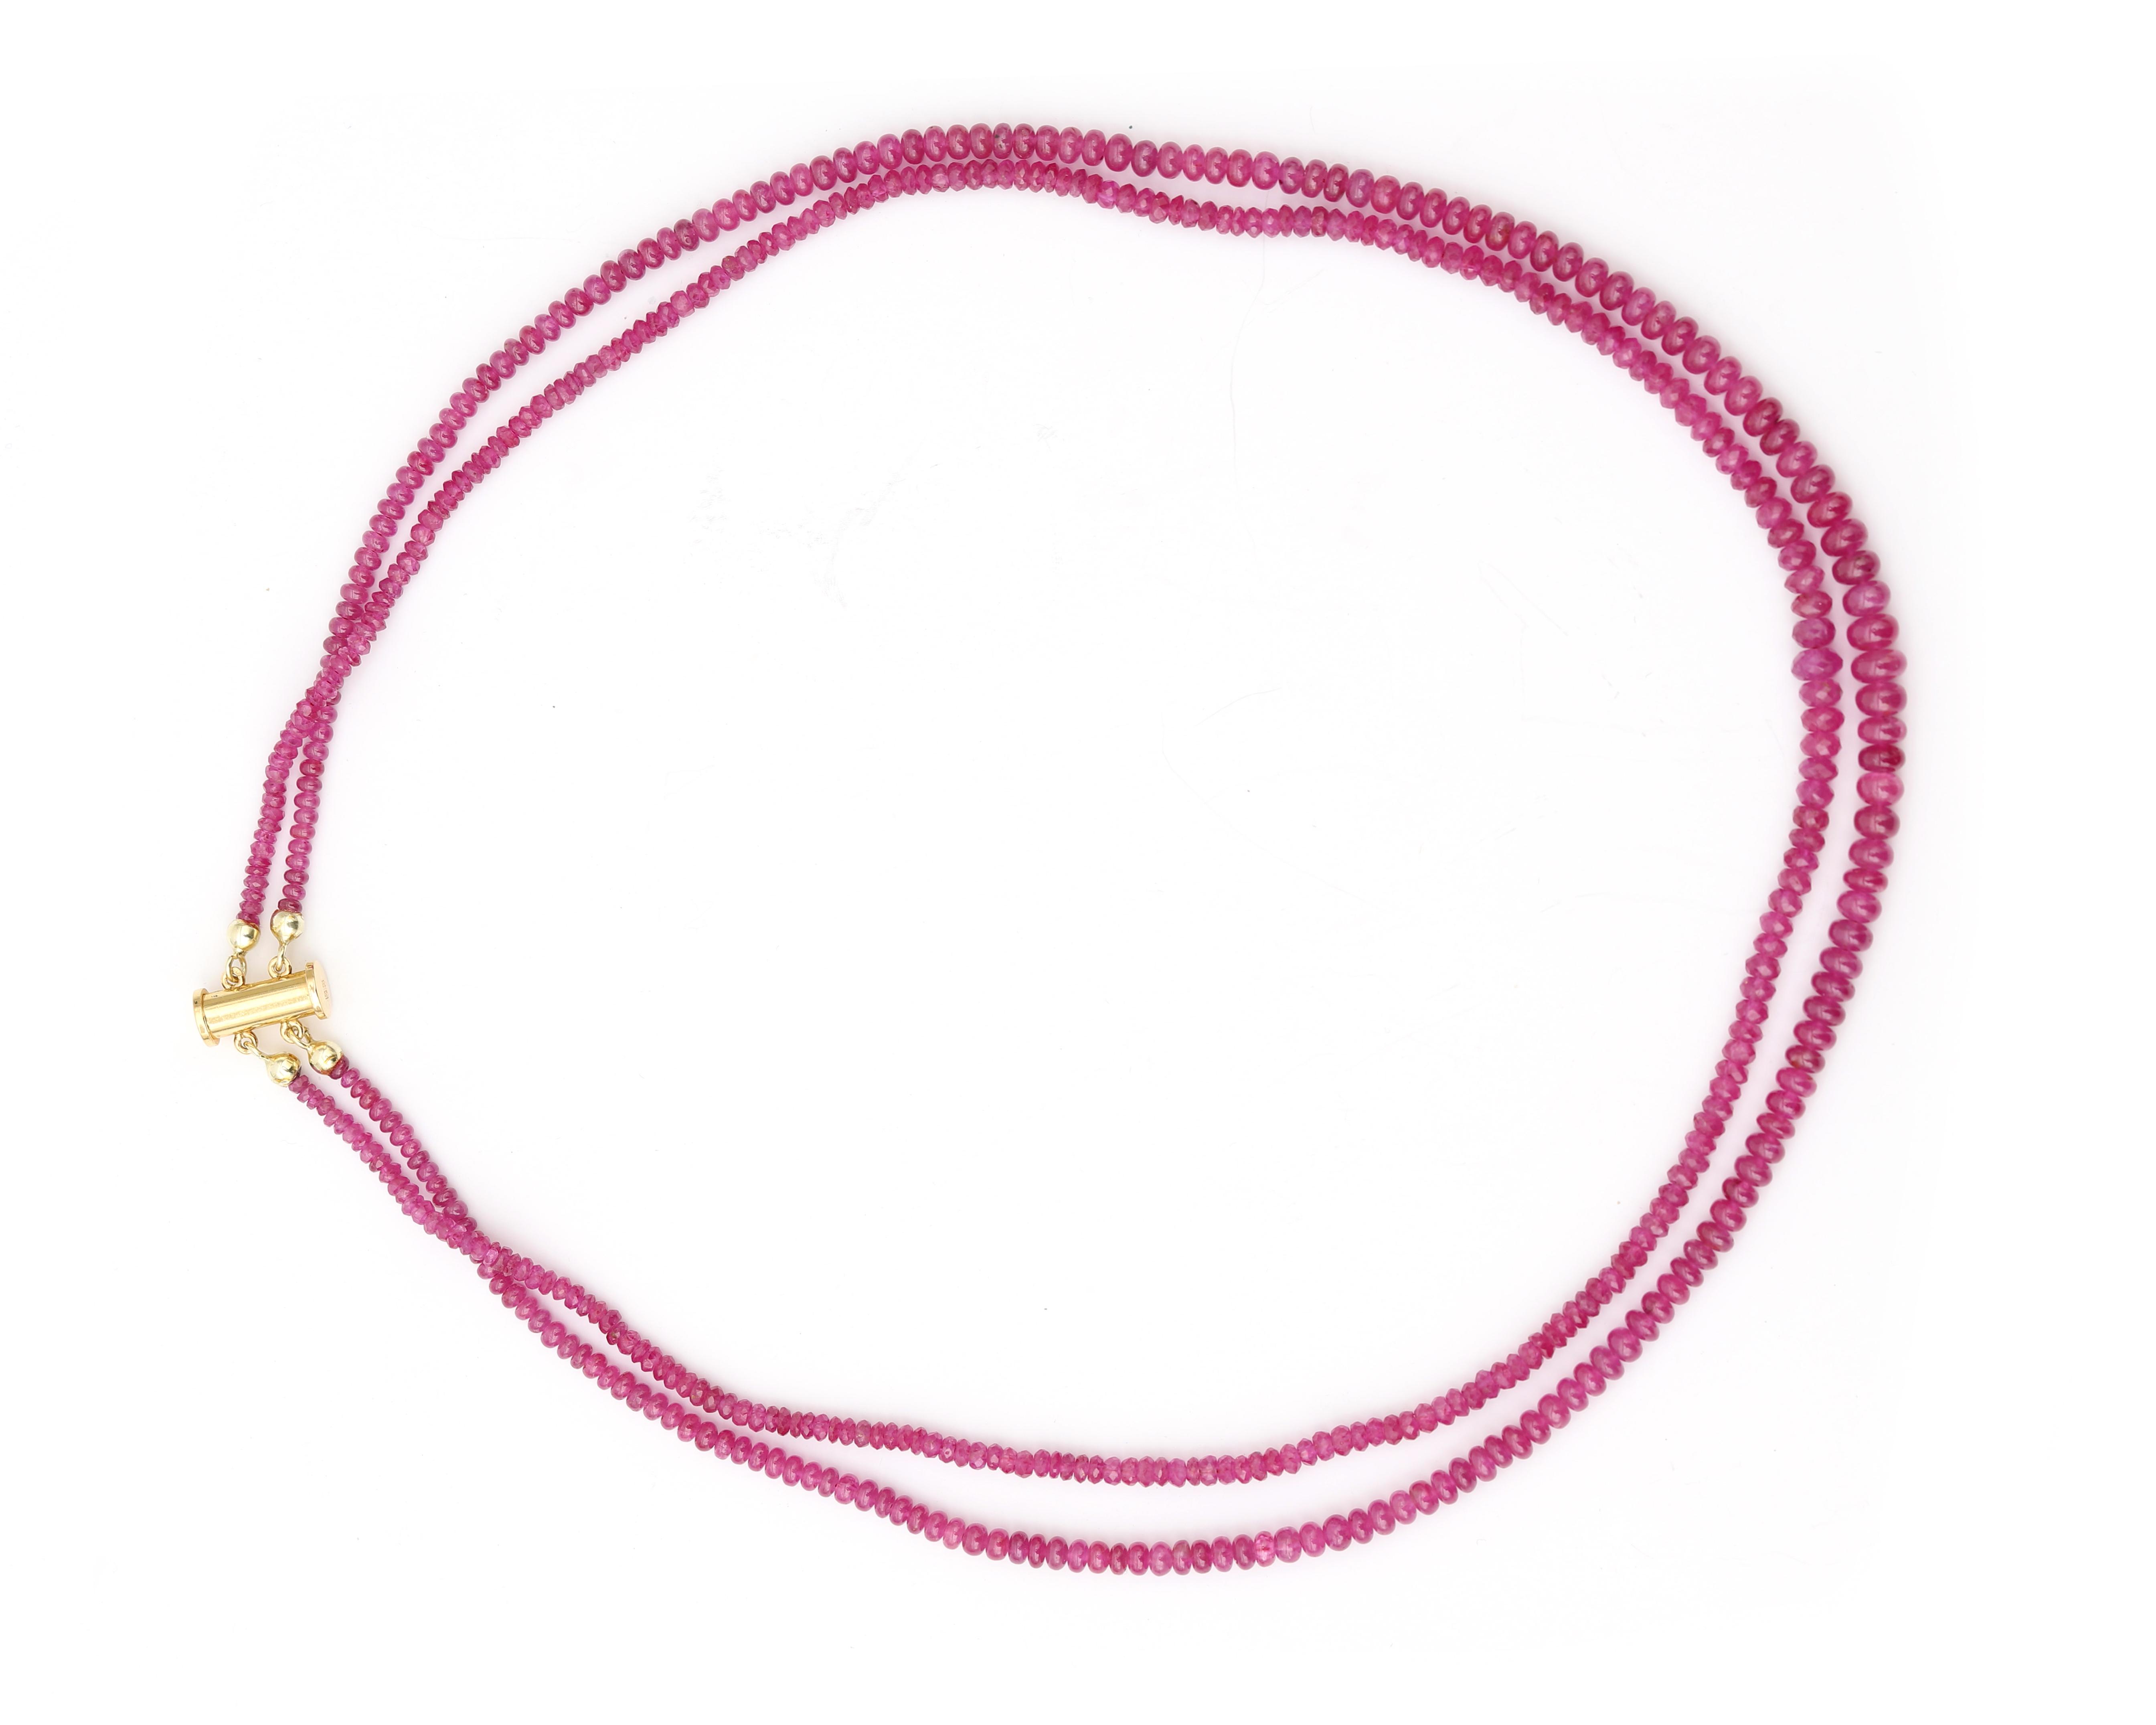 A double strung string of rubies on 18 karat gold magnetic lock - Image 3 of 3